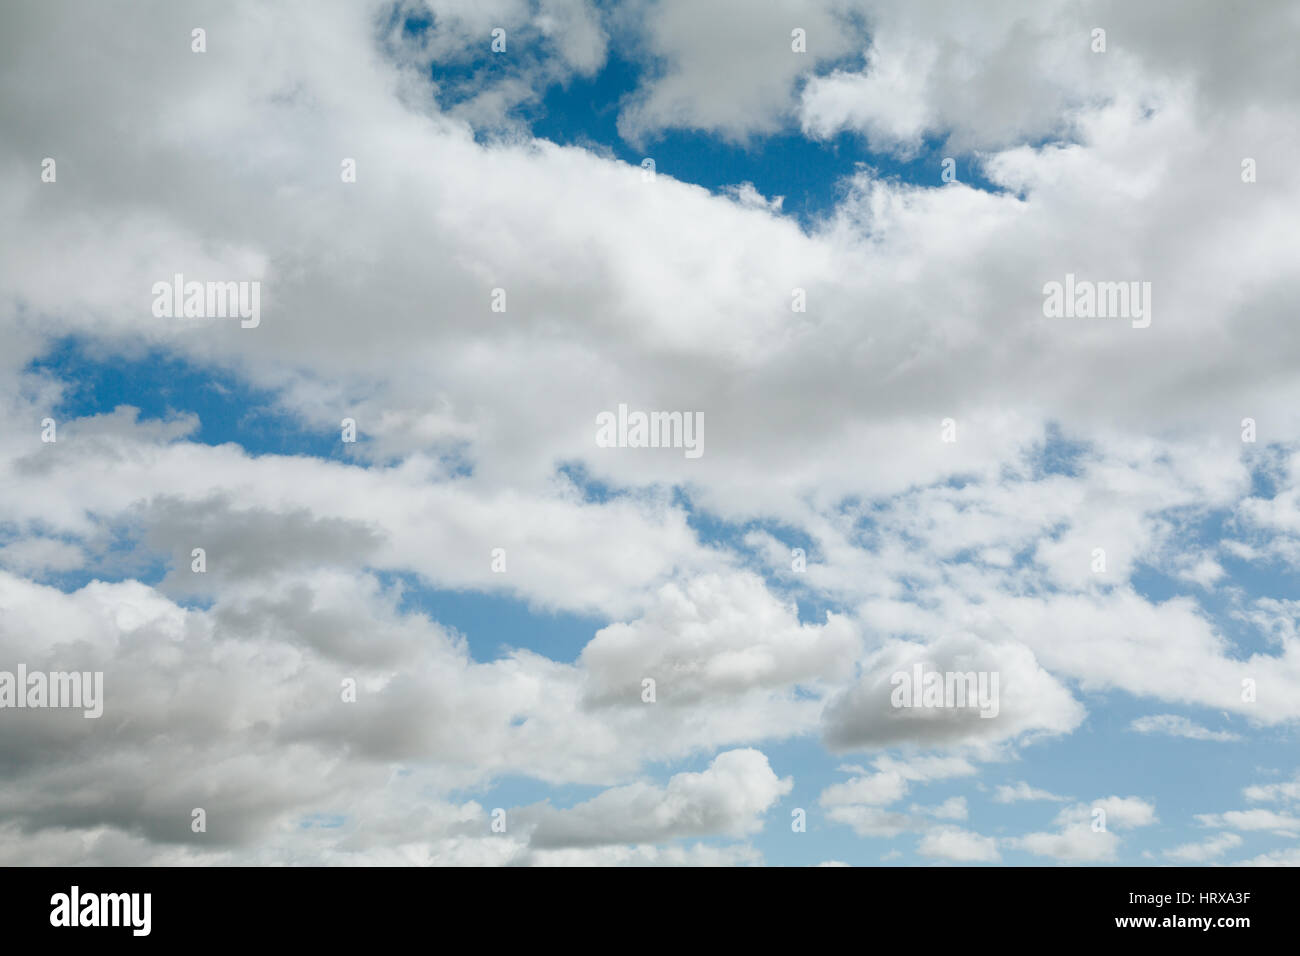 Low angle view of a blue sky with white clouds Stock Photo